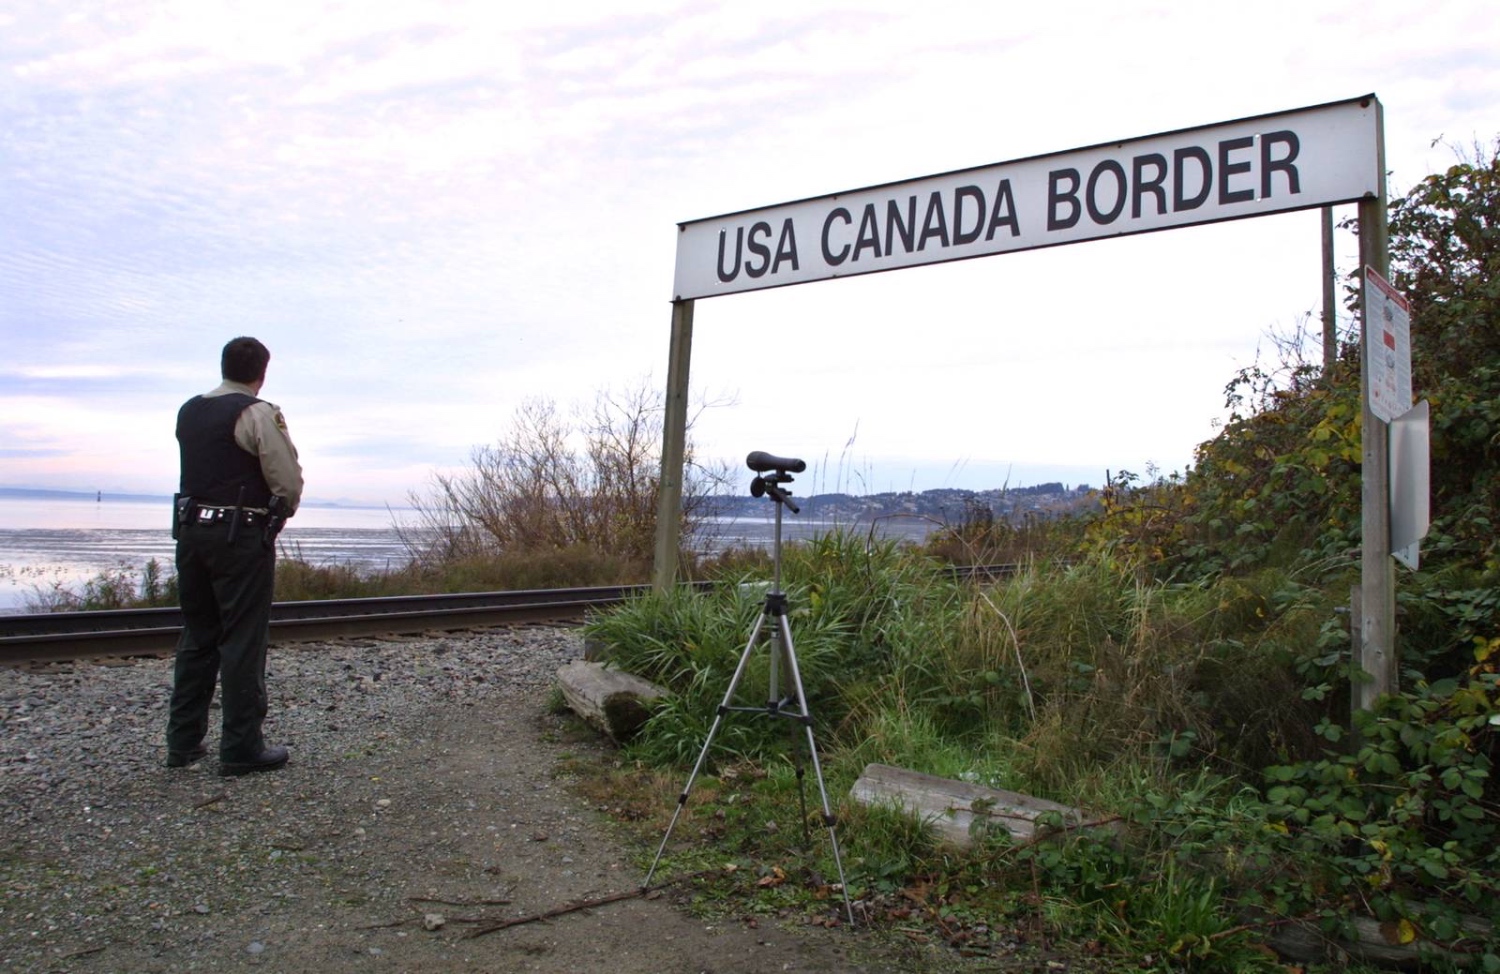 A Canadian Customs and Fisheries officer watches over the U.S.-Canada border between Blaine, Washington and White Rock, British Columbia November 8, 2001. (Photo by Jeff Vinnick/Getty Images)